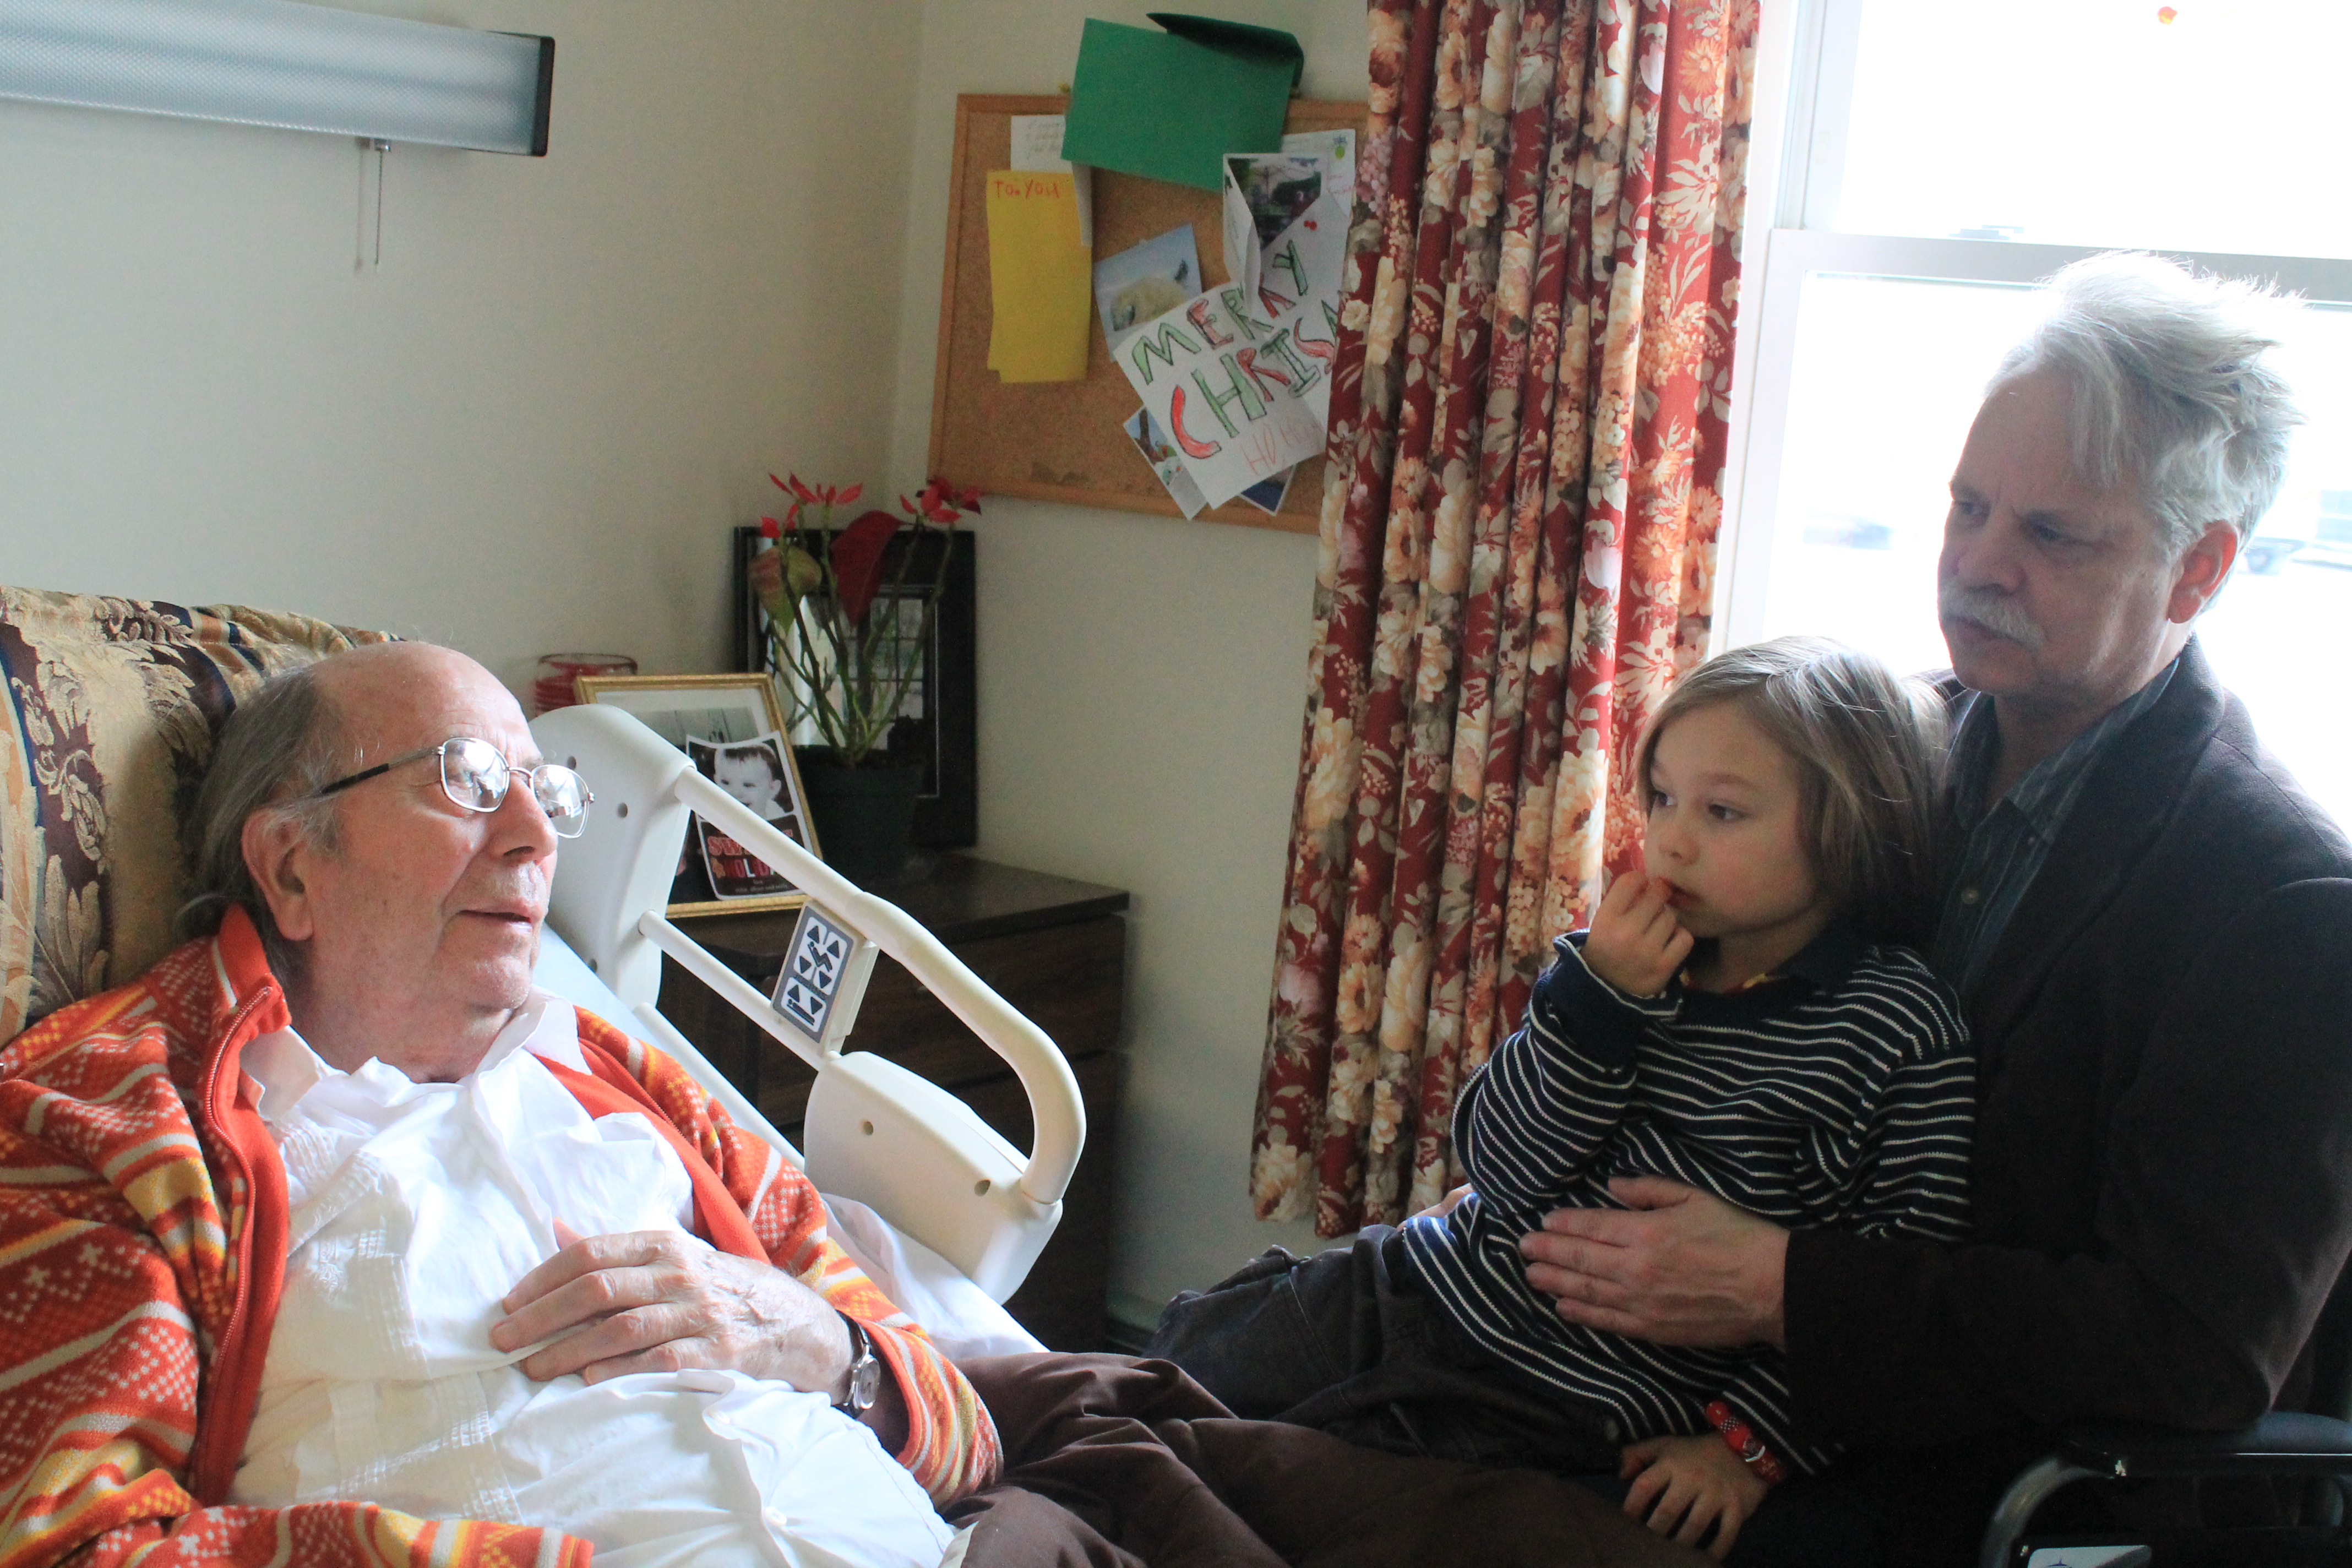 Visiting Gerry Williams, December 16th, 2012